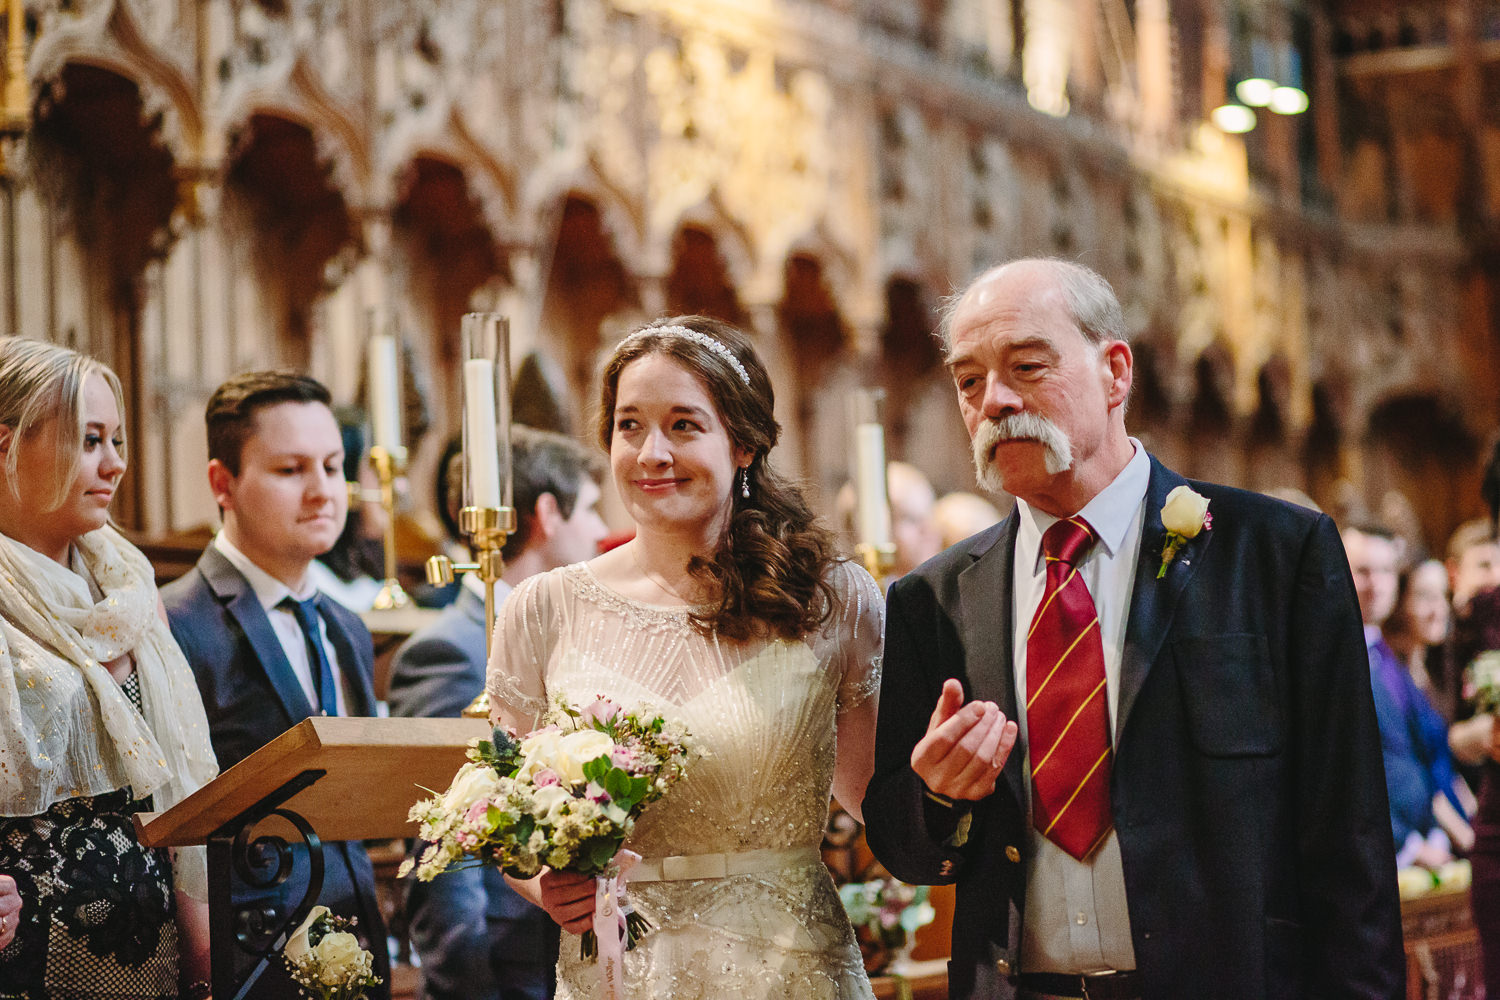 Bride and father walking down the aisle at Selwyn College chapel at Cambridge University